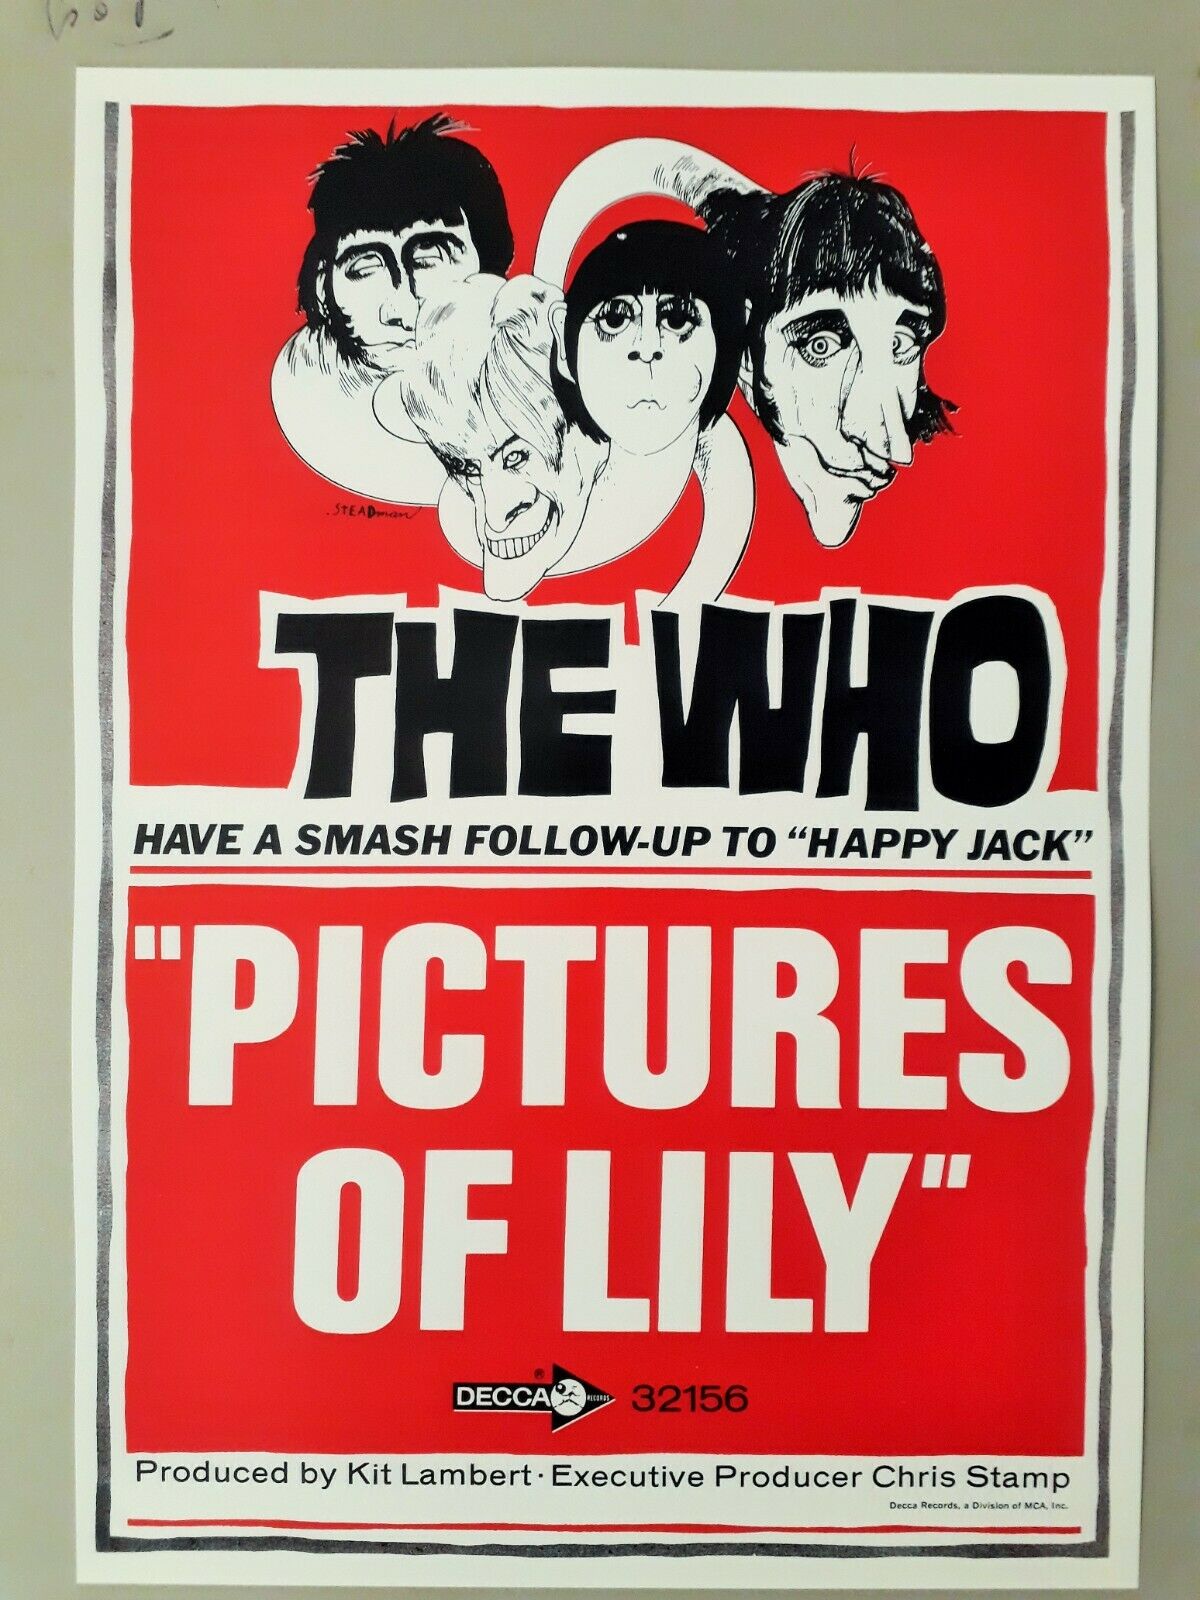 The Who promotional poster Pictures of Lily USA 1967 new reprinted e –  Bamalama Posters